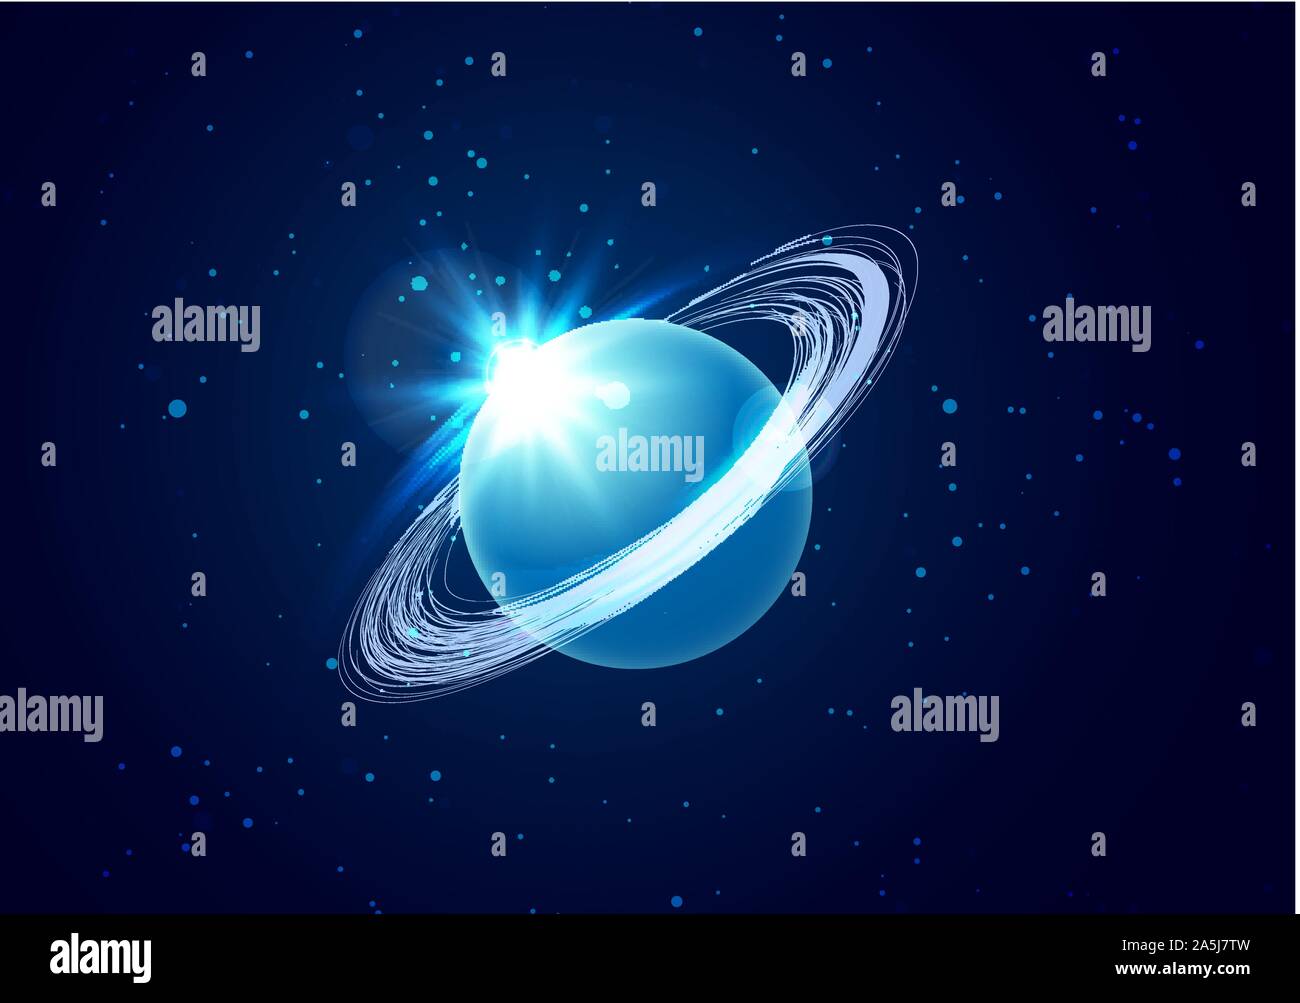 Planet Uranus in space background with star. The planet in astrology is responsible for modern technologies and innovations. Vector Stock Vector